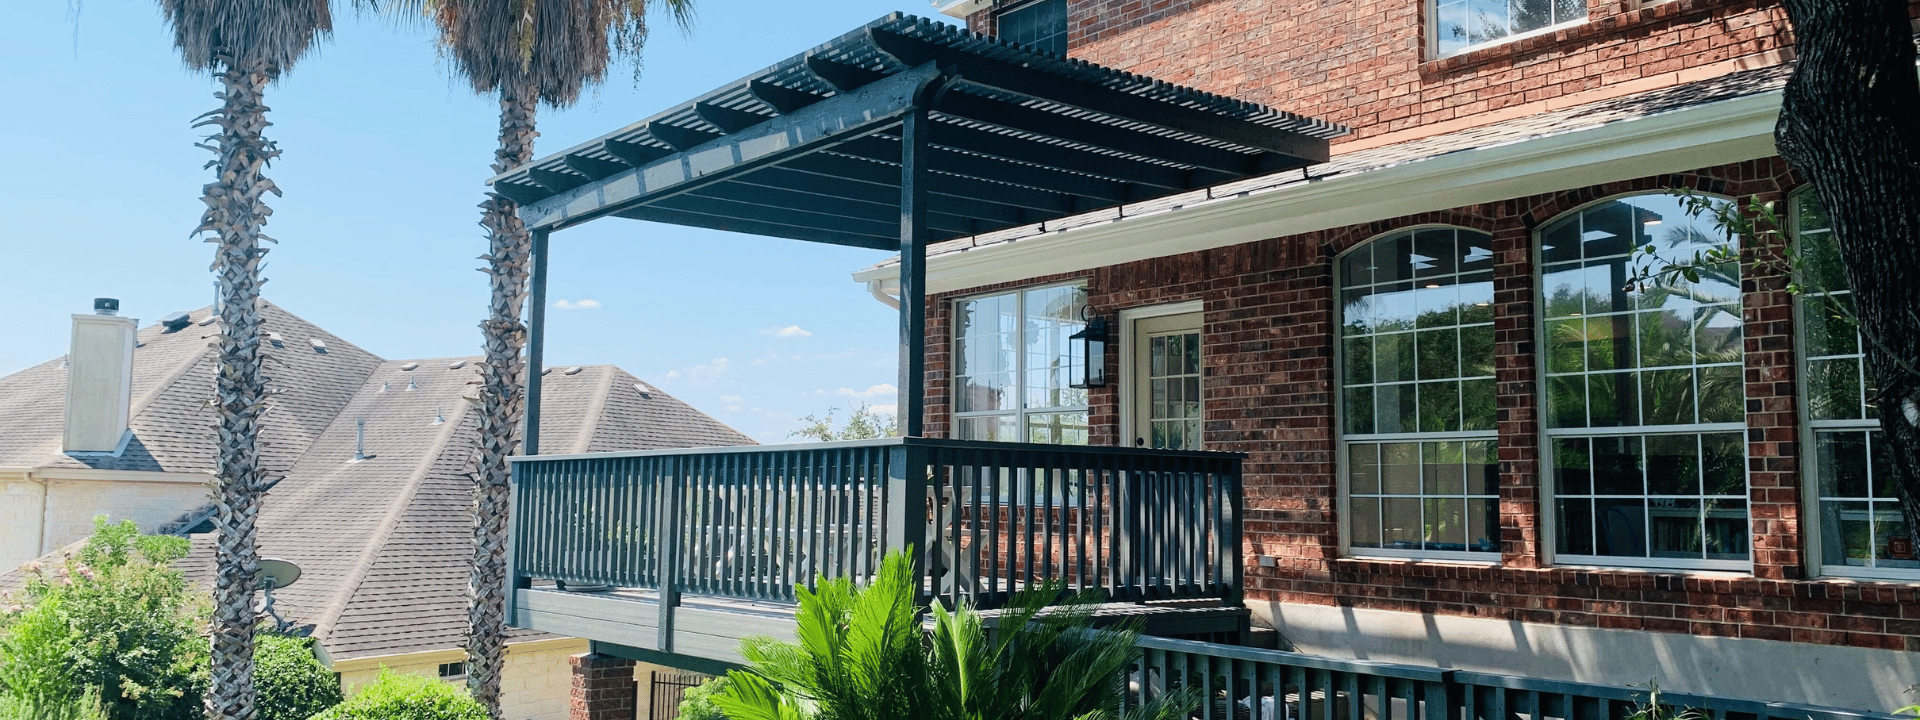 Teal colored patio cover over the deck of a second story brick house in Austin, Texas